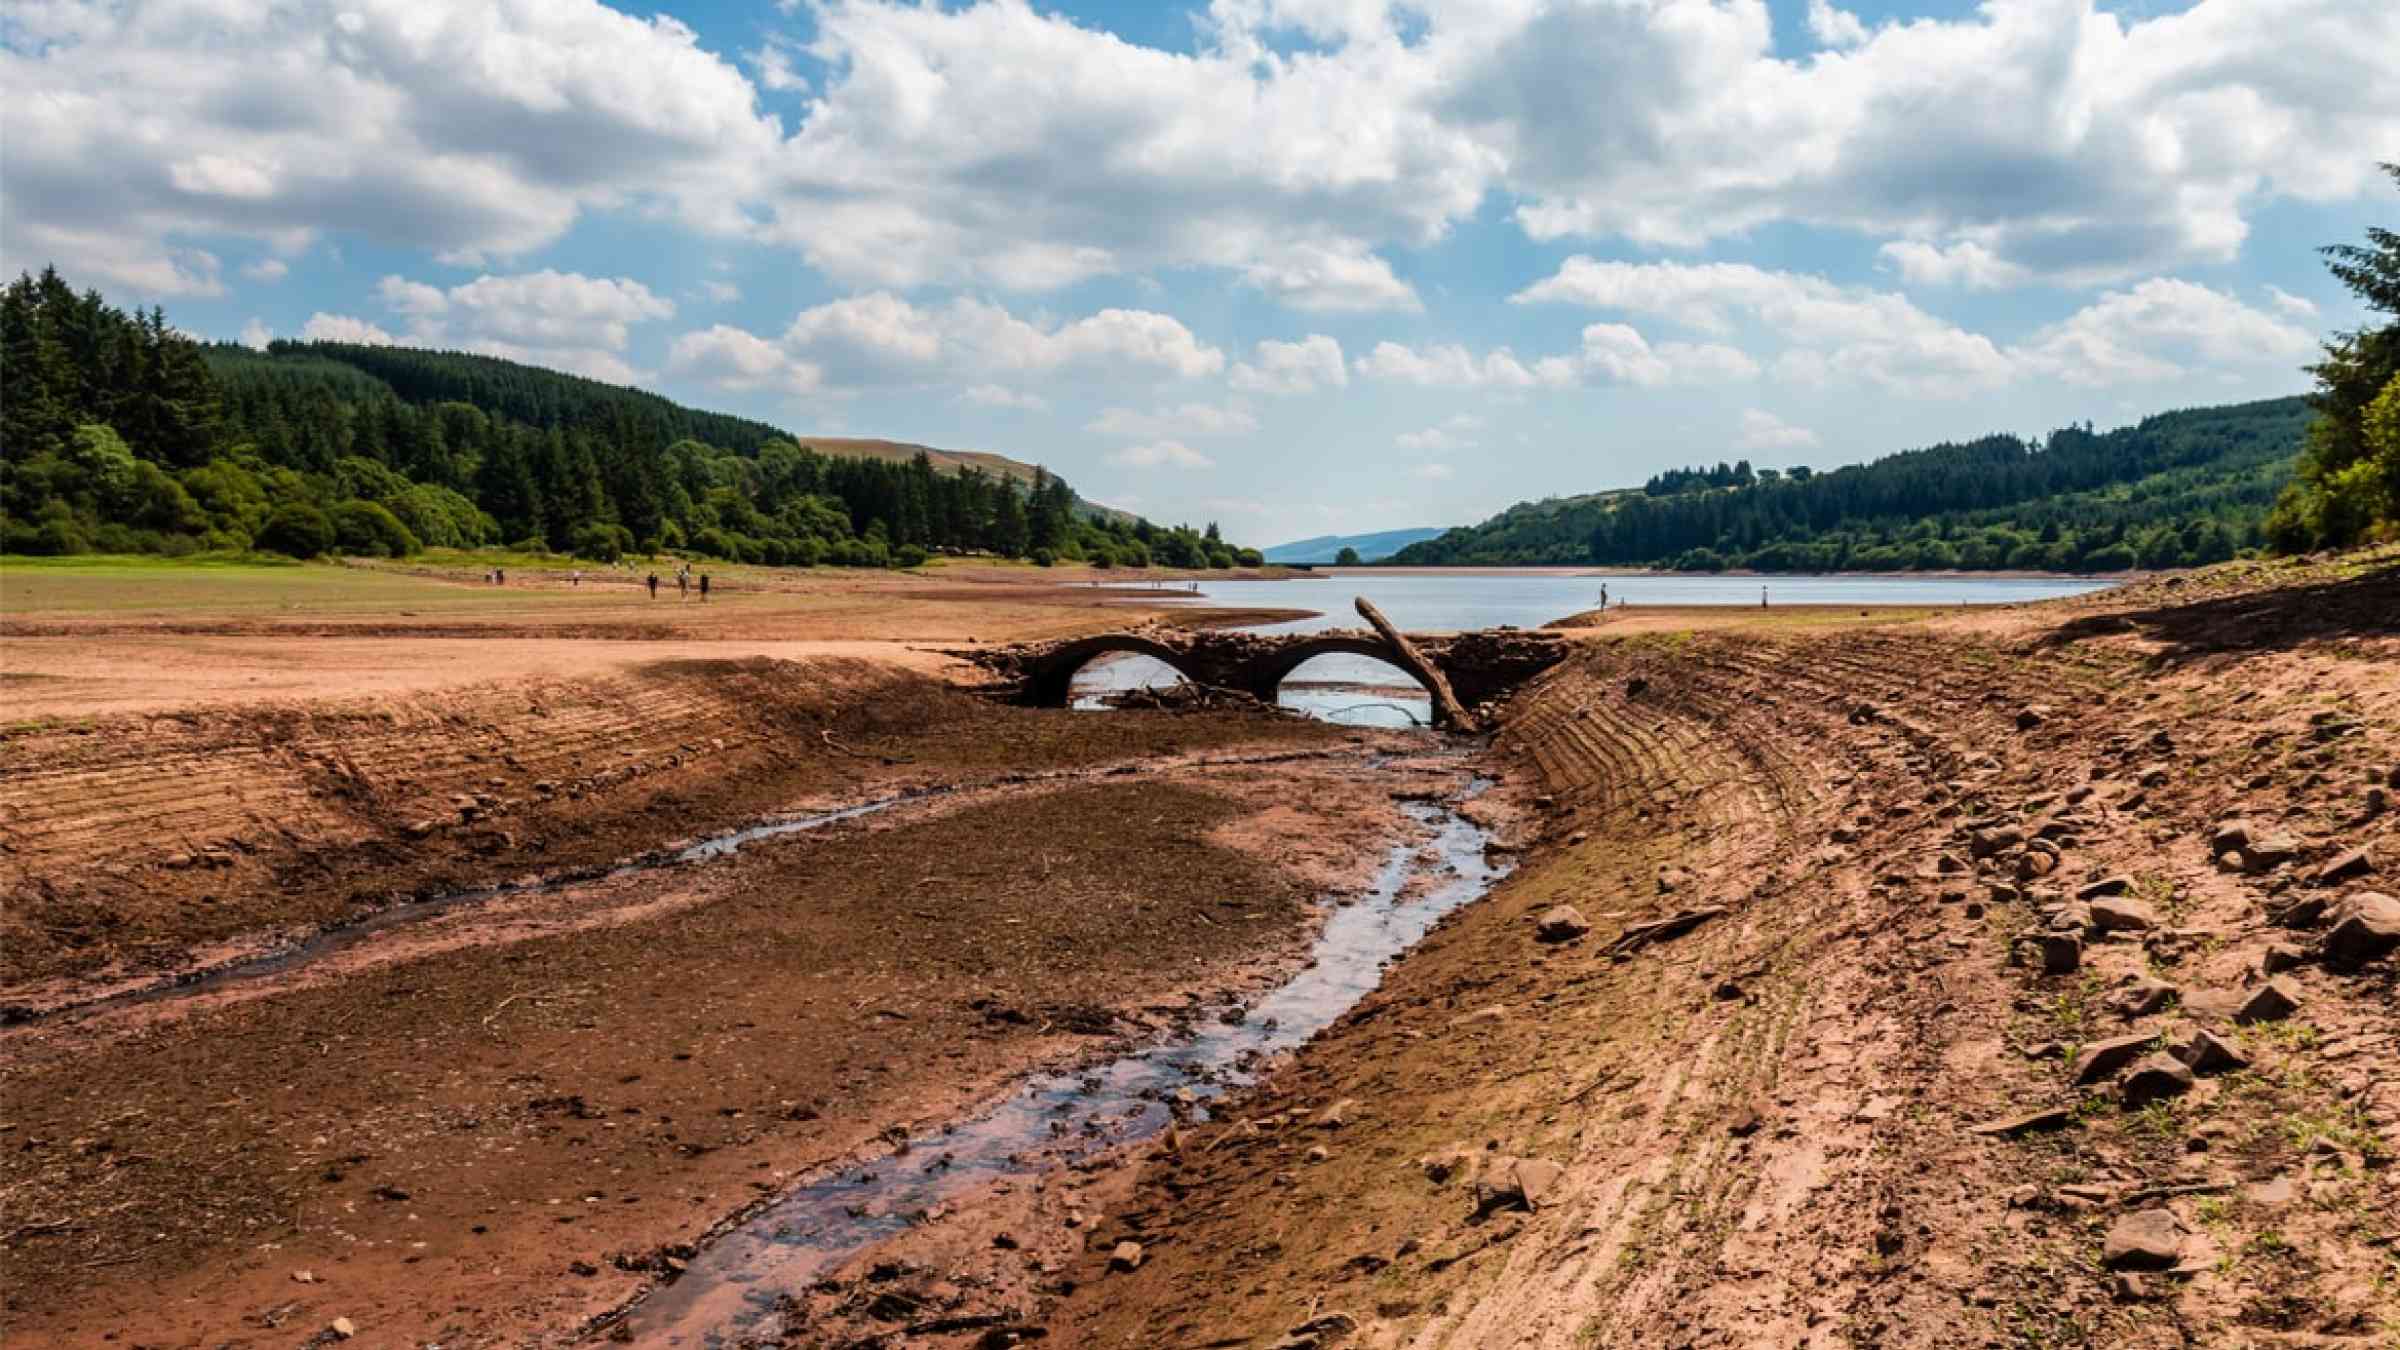 Submerged bridge in a dried up reservoir in the UK